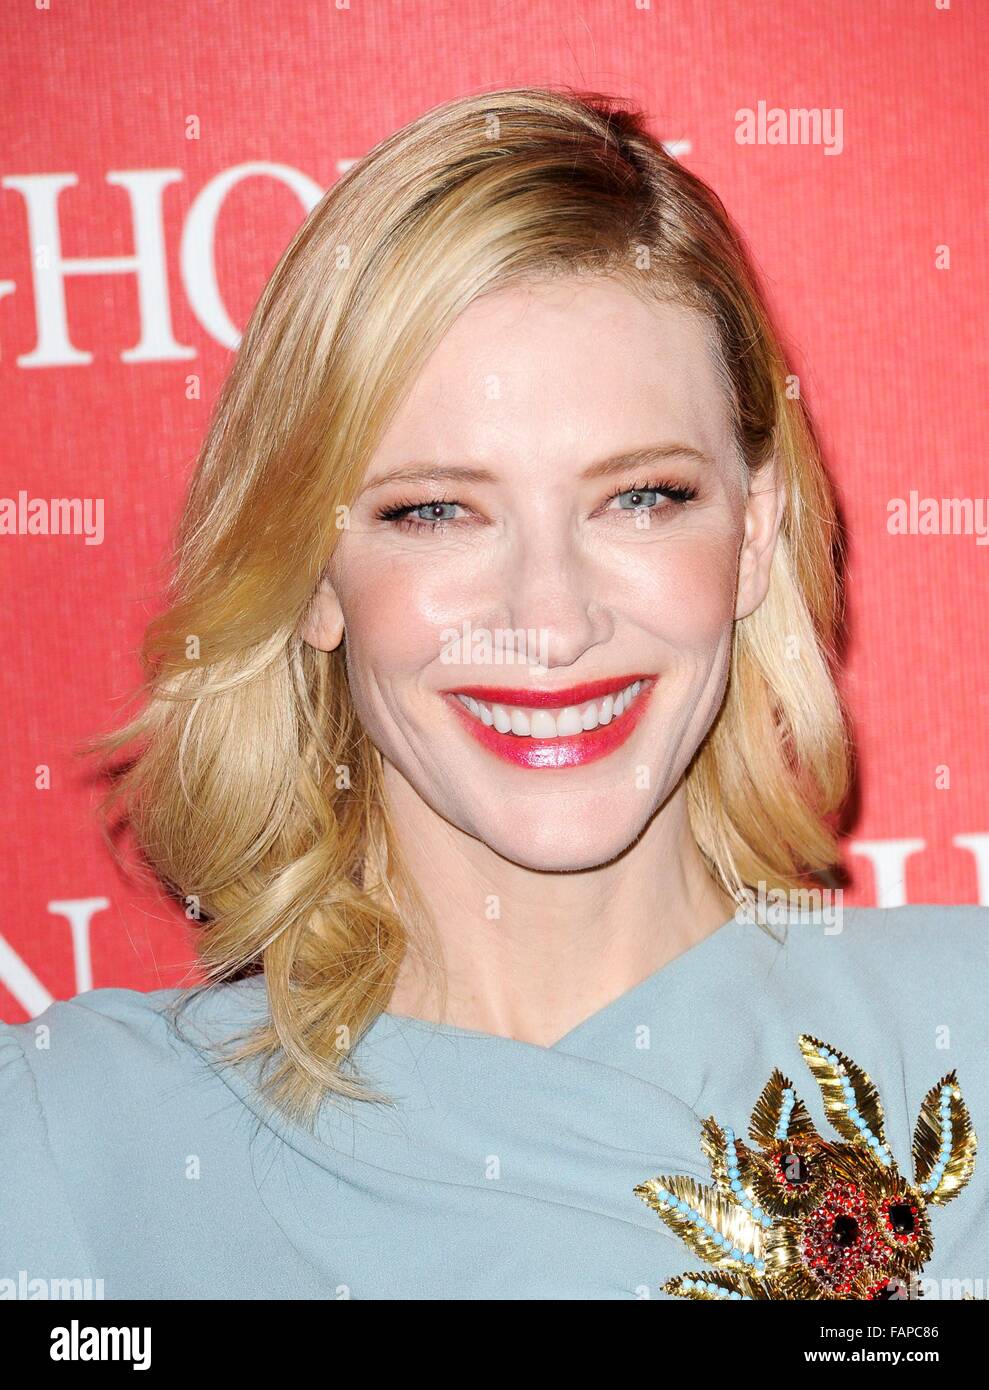 Cate Blanchett at arrivals for The 27th Annual Palm Springs International Film Festival Awards Show, Palm Springs Convention Center, Palm Springs, CA January 2, 2016. Photo By: Elizabeth Goodenough/Everett Collection Stock Photo